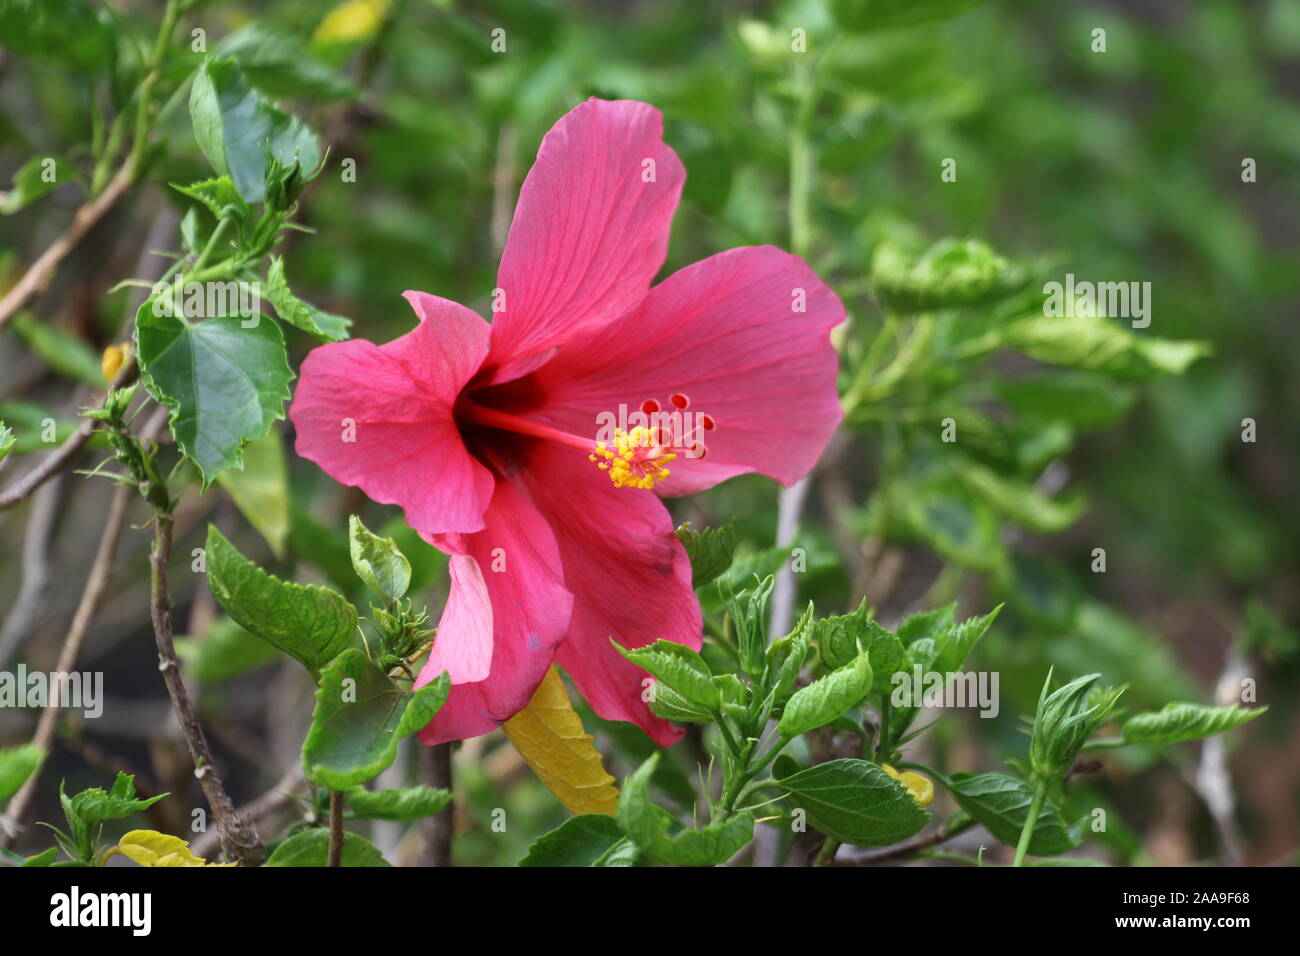 Pink hibiscus with yellow pollen in close-up Stock Photo